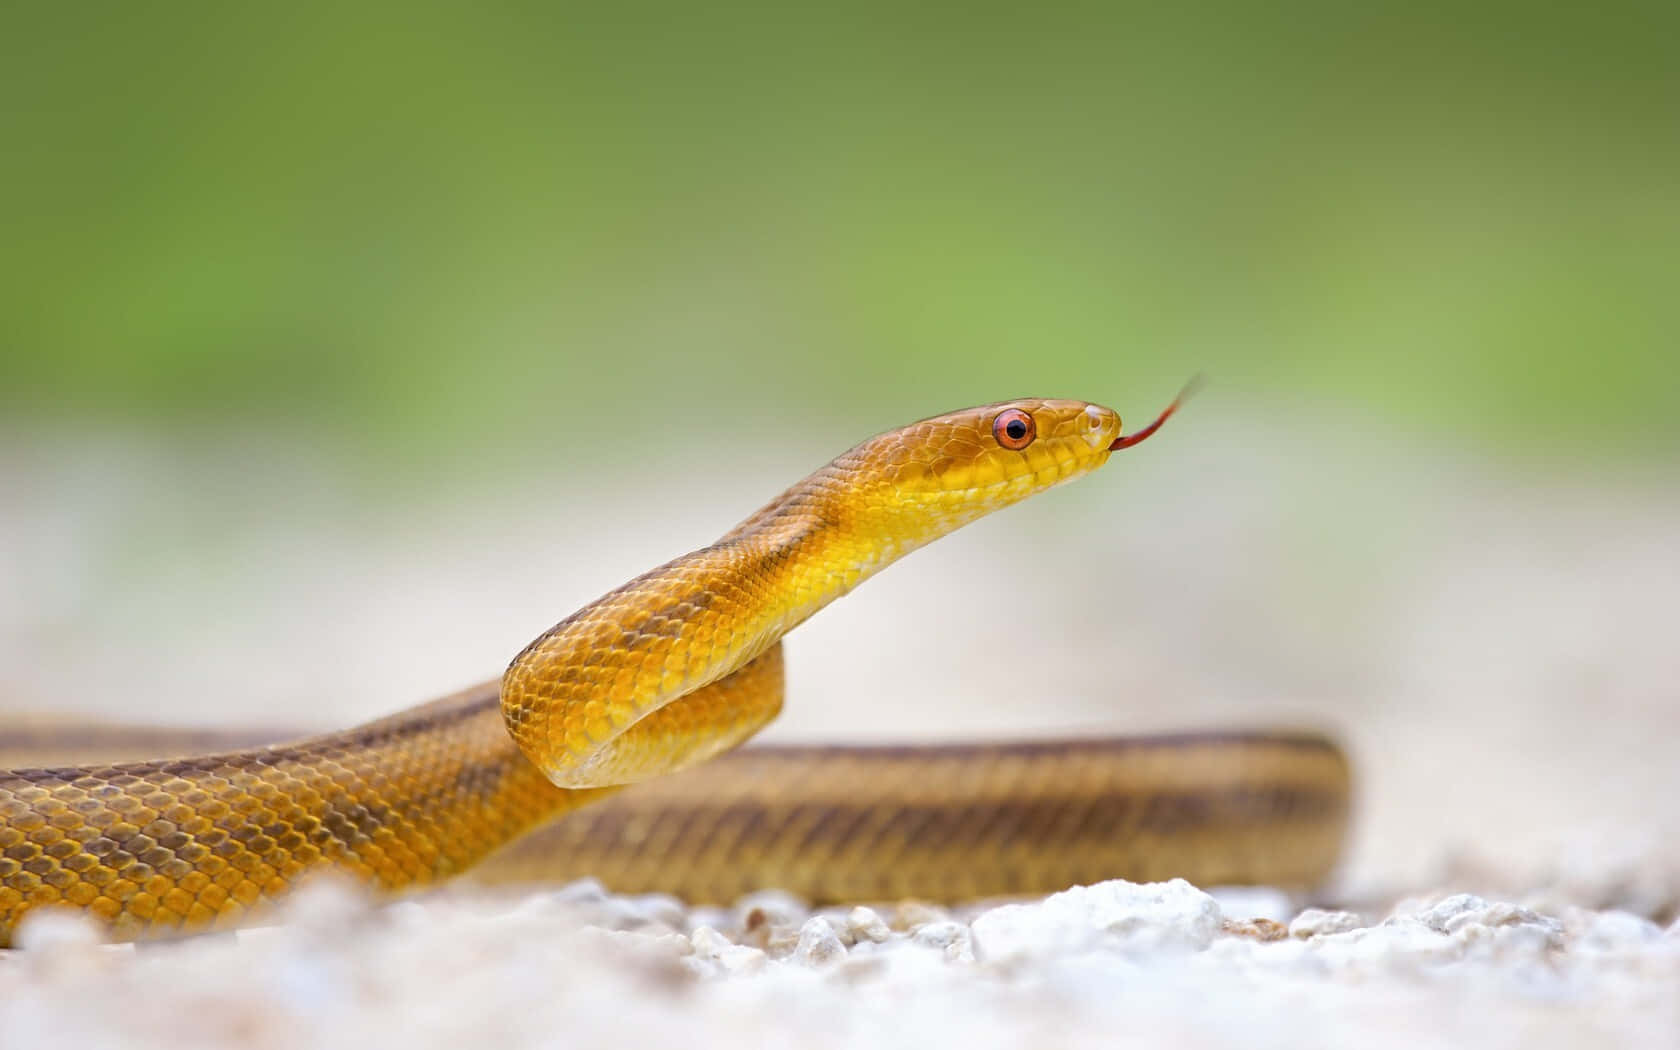 A mesmerizing yellow snake slithering in the wild Wallpaper